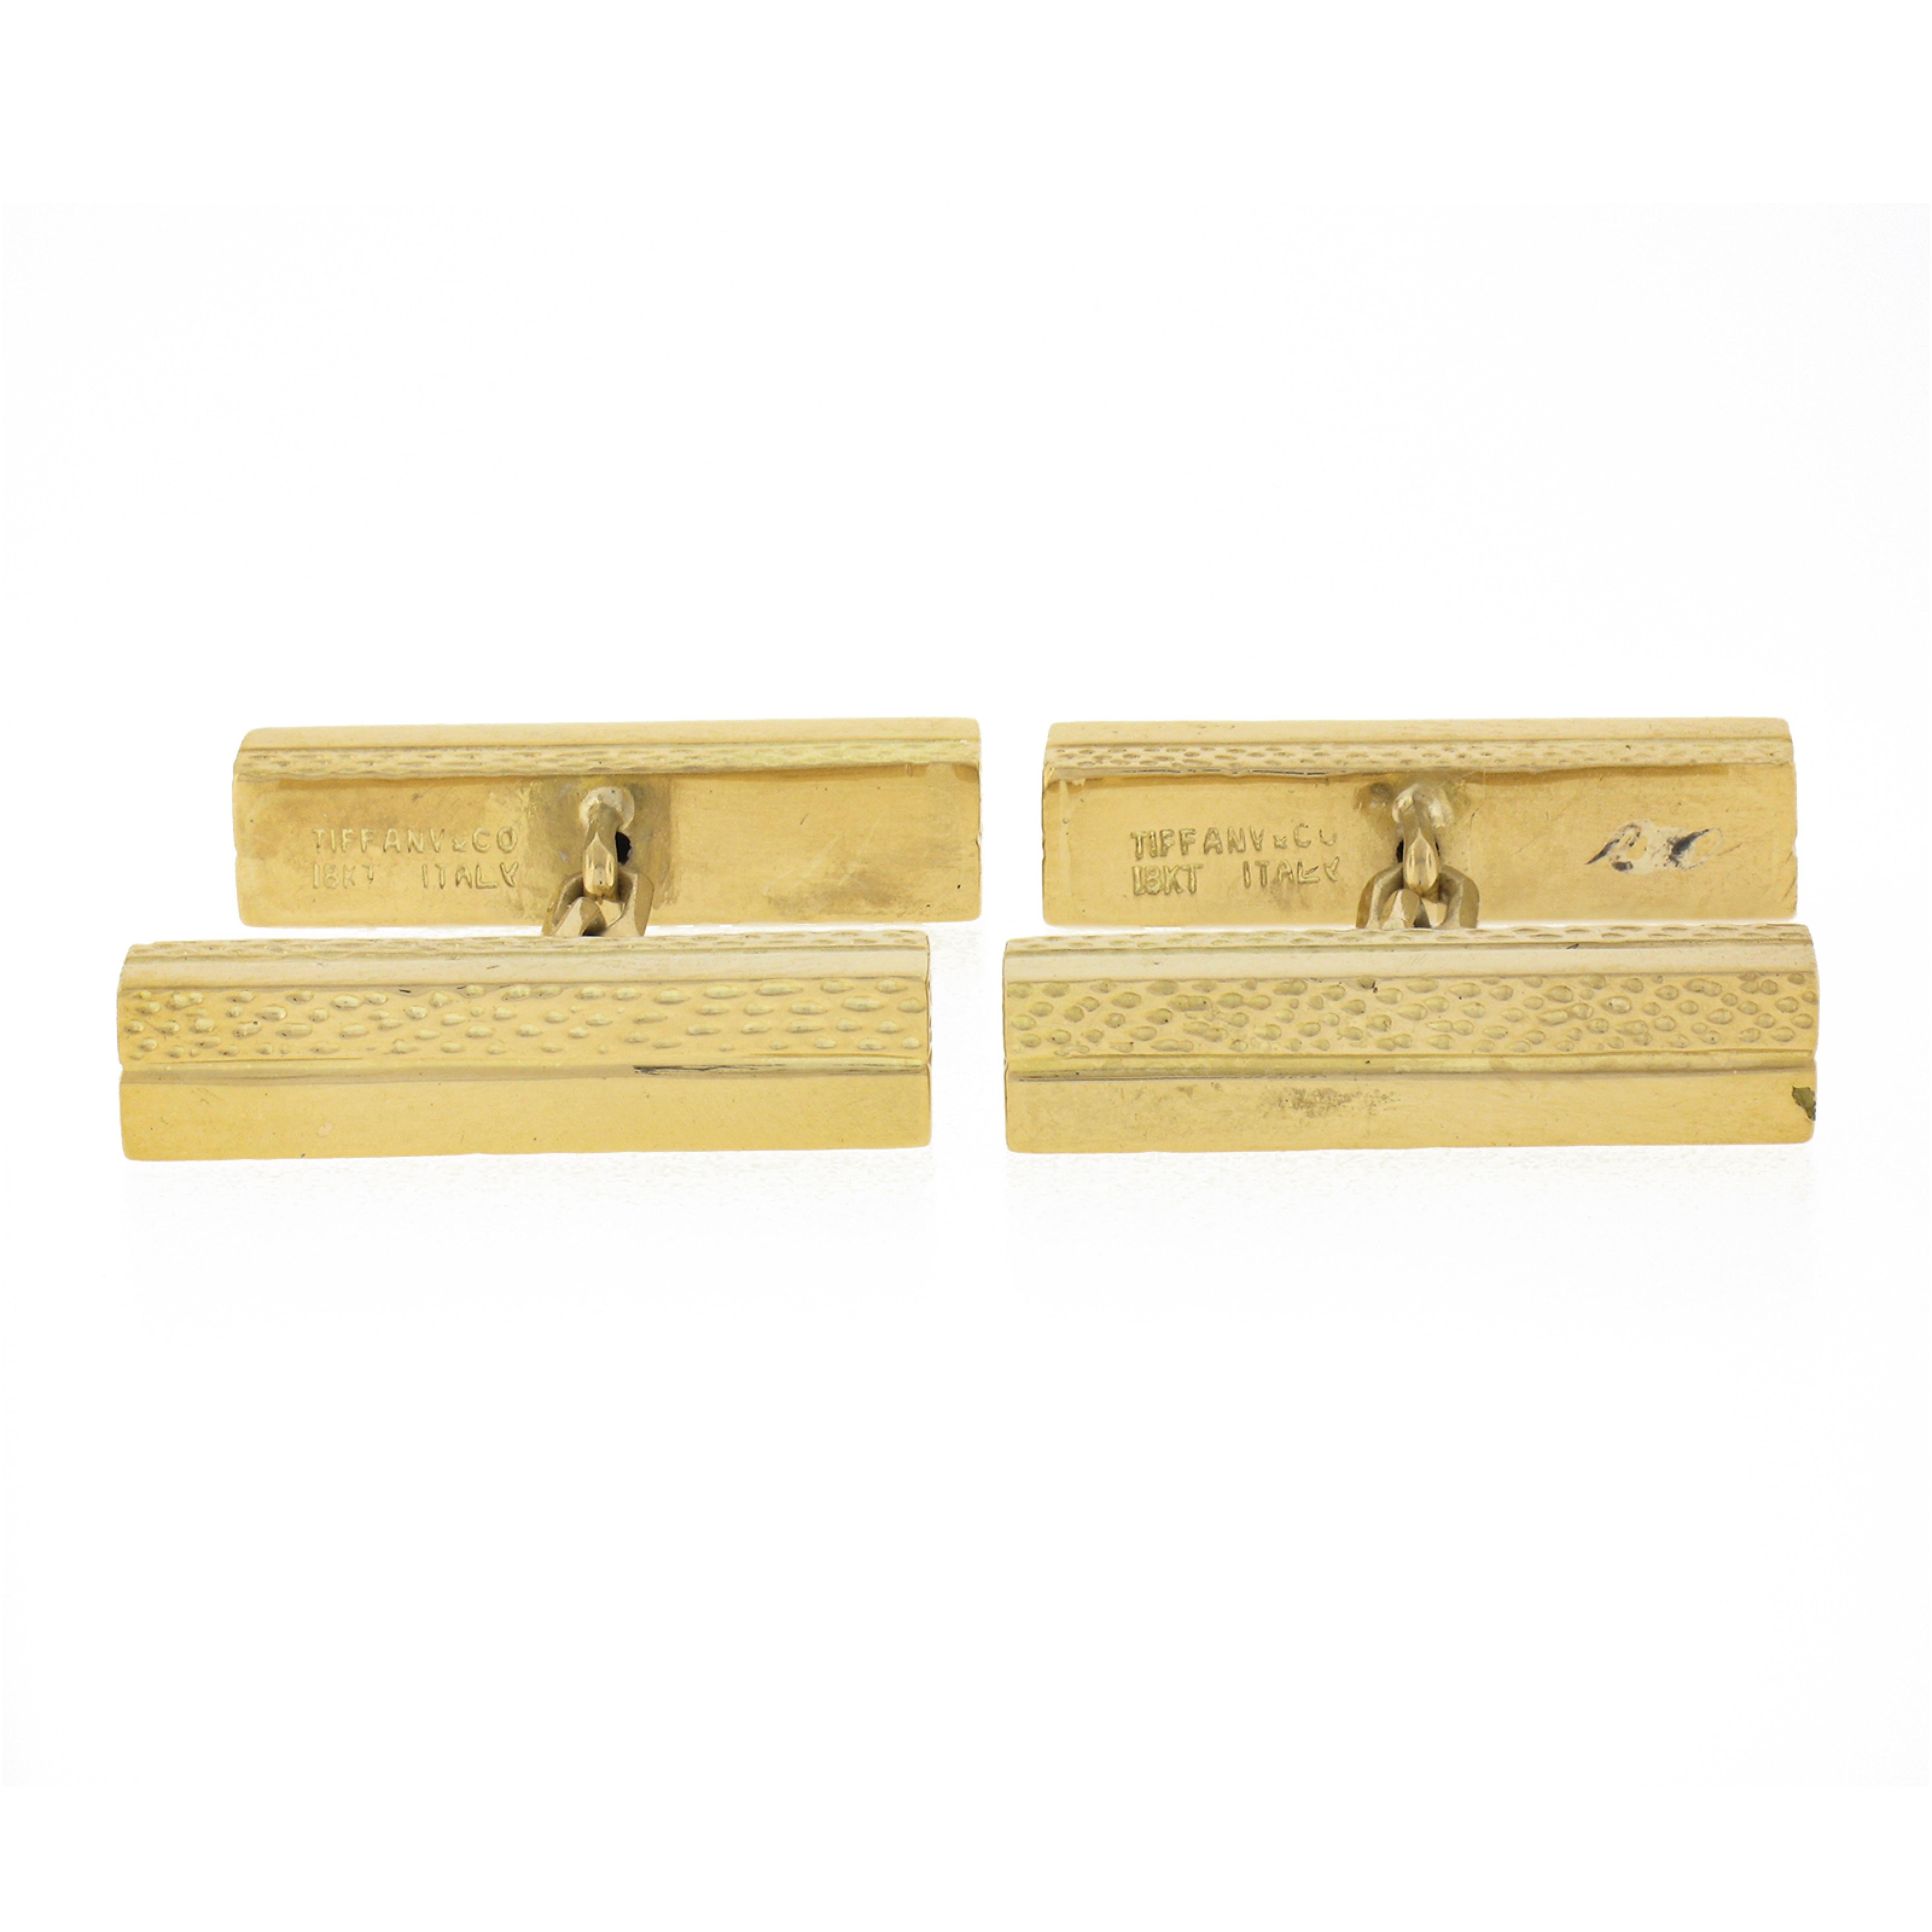 These fine vintage Italian Tiffany & Co. cuff links were crafted from solid 18k yellow gold it features dual panels of nice geometric box shape. The panels are both textured and smooth polished finish throughout. This amazing pair of cufflinks